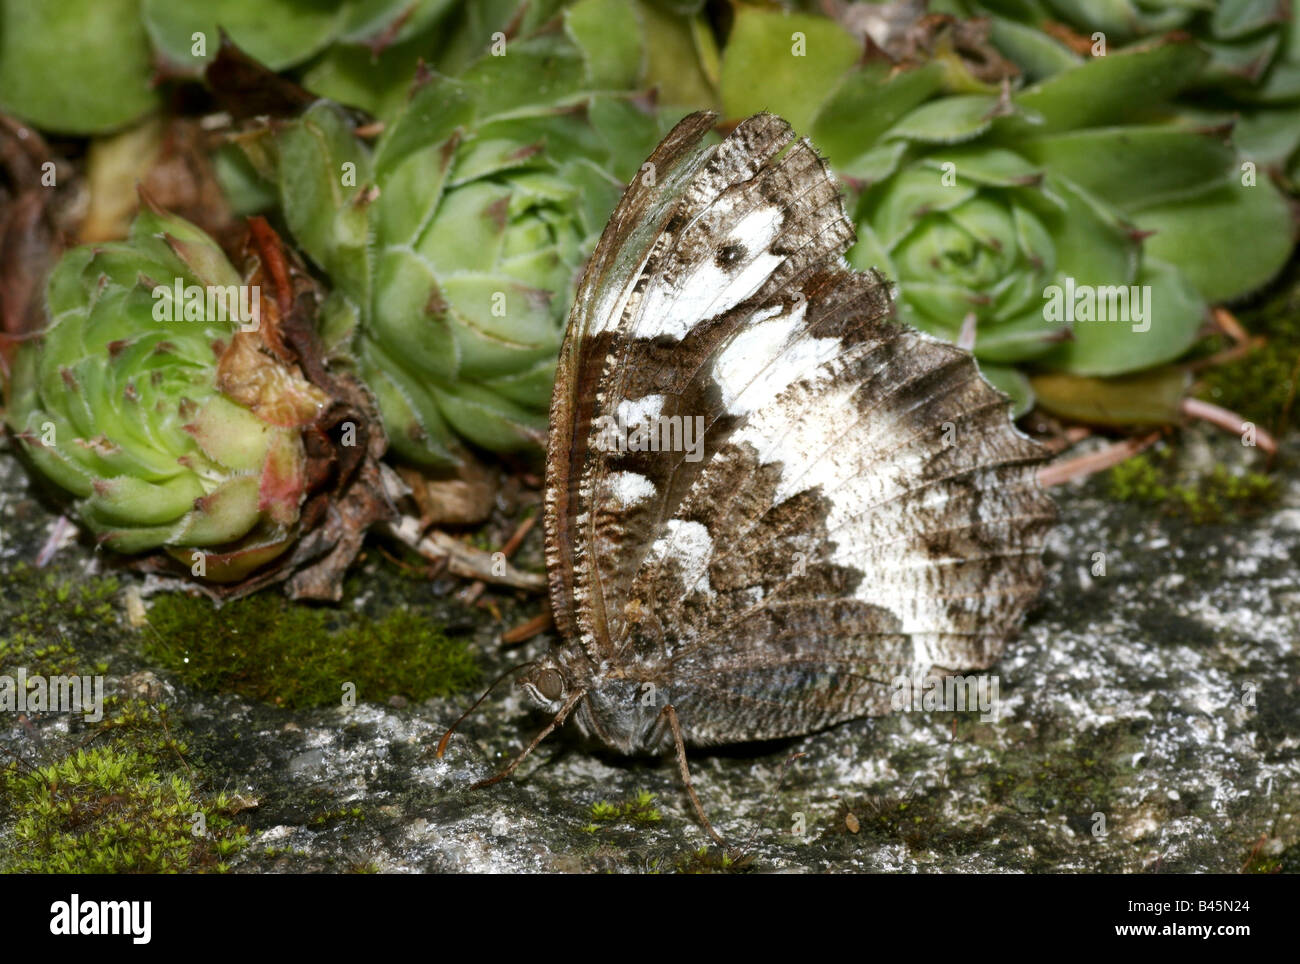 zoology / animals, insect, Nymphalidae, Great Banded Grayling (Brintesia circe), sitting on stone, Leitha mountains, Austria, distribution: Europe, Additional-Rights-Clearance-Info-Not-Available Stock Photo